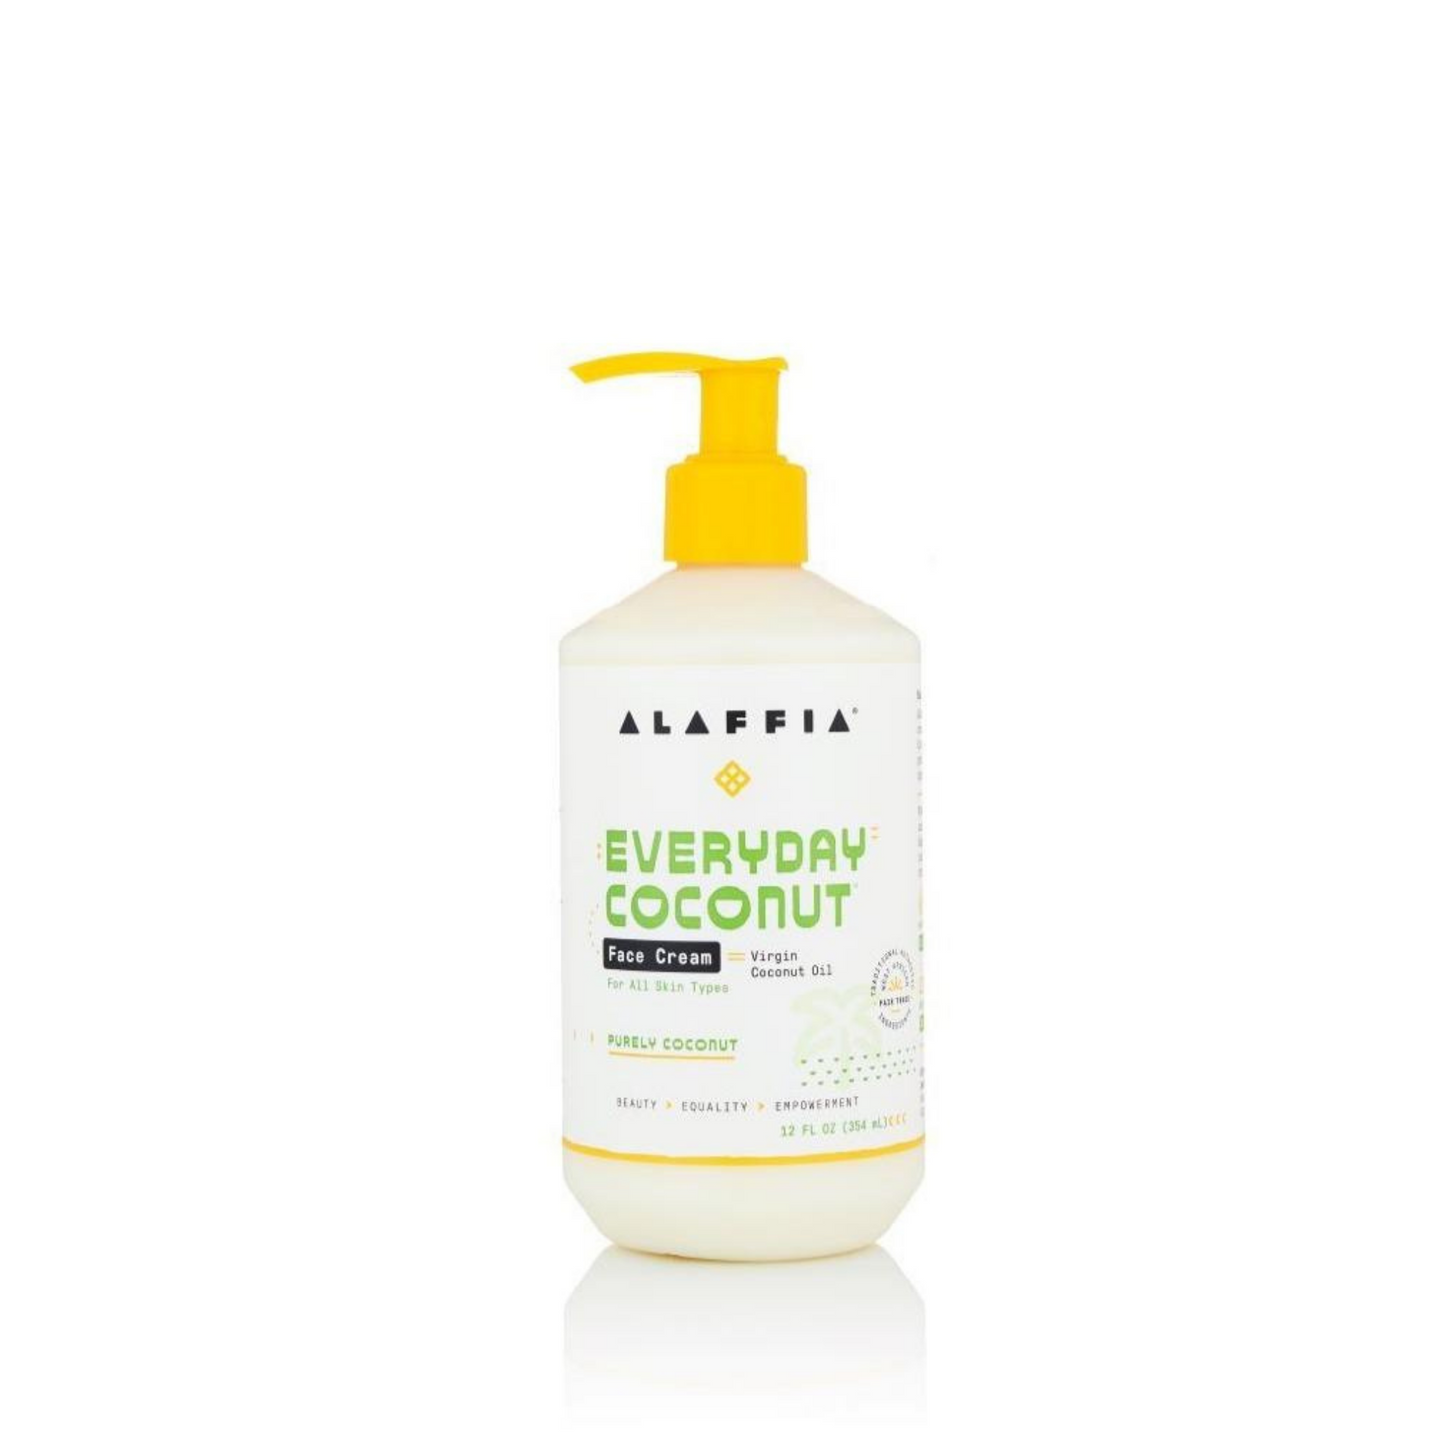 Primary image of Everyday Coconut Hydrating Body Wash - Purely Coconut